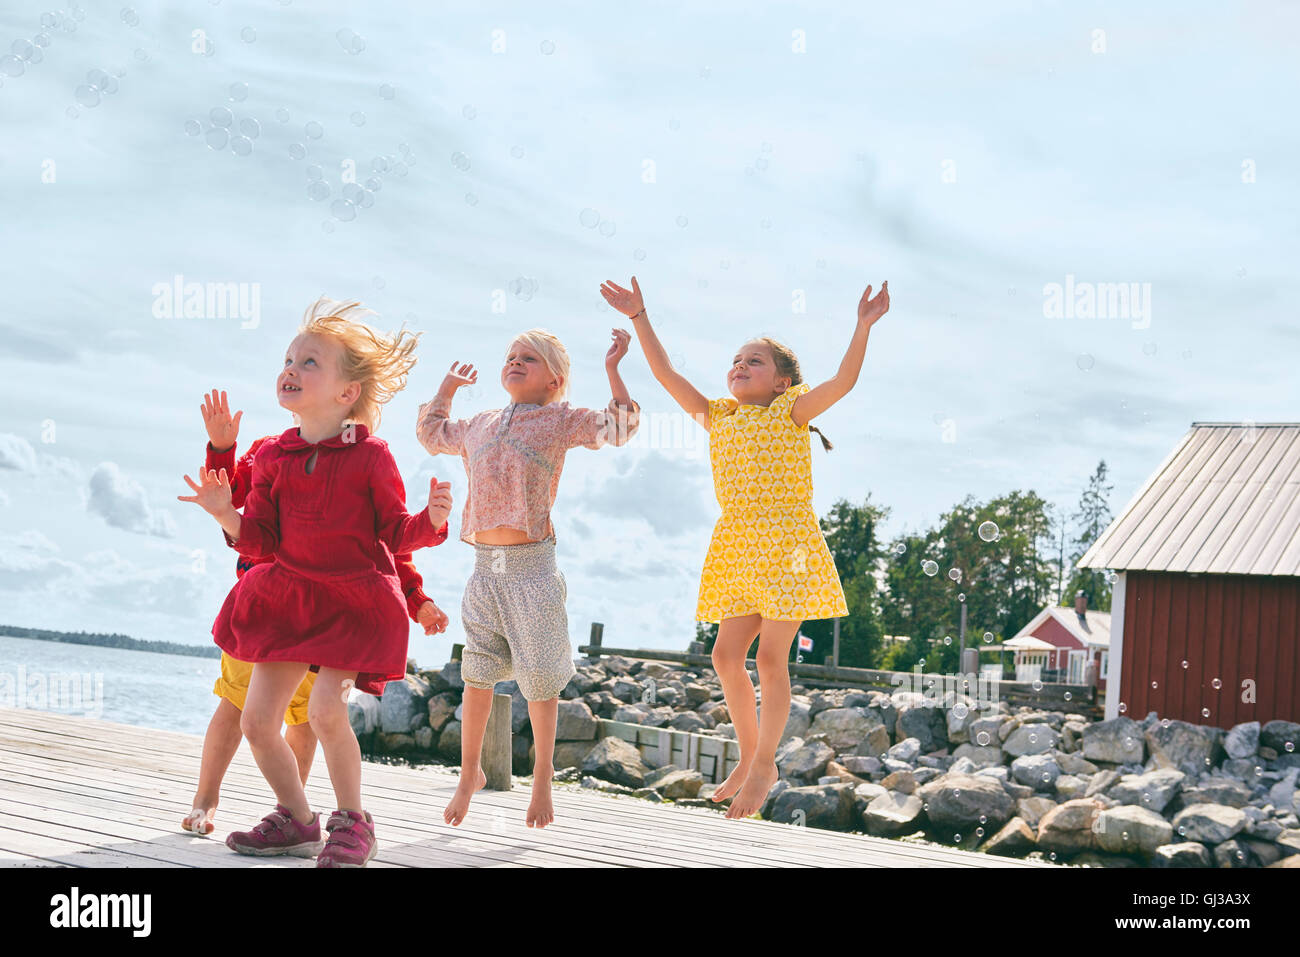 Group of young friends playing on wooden pier, reaching for bubbles Stock Photo